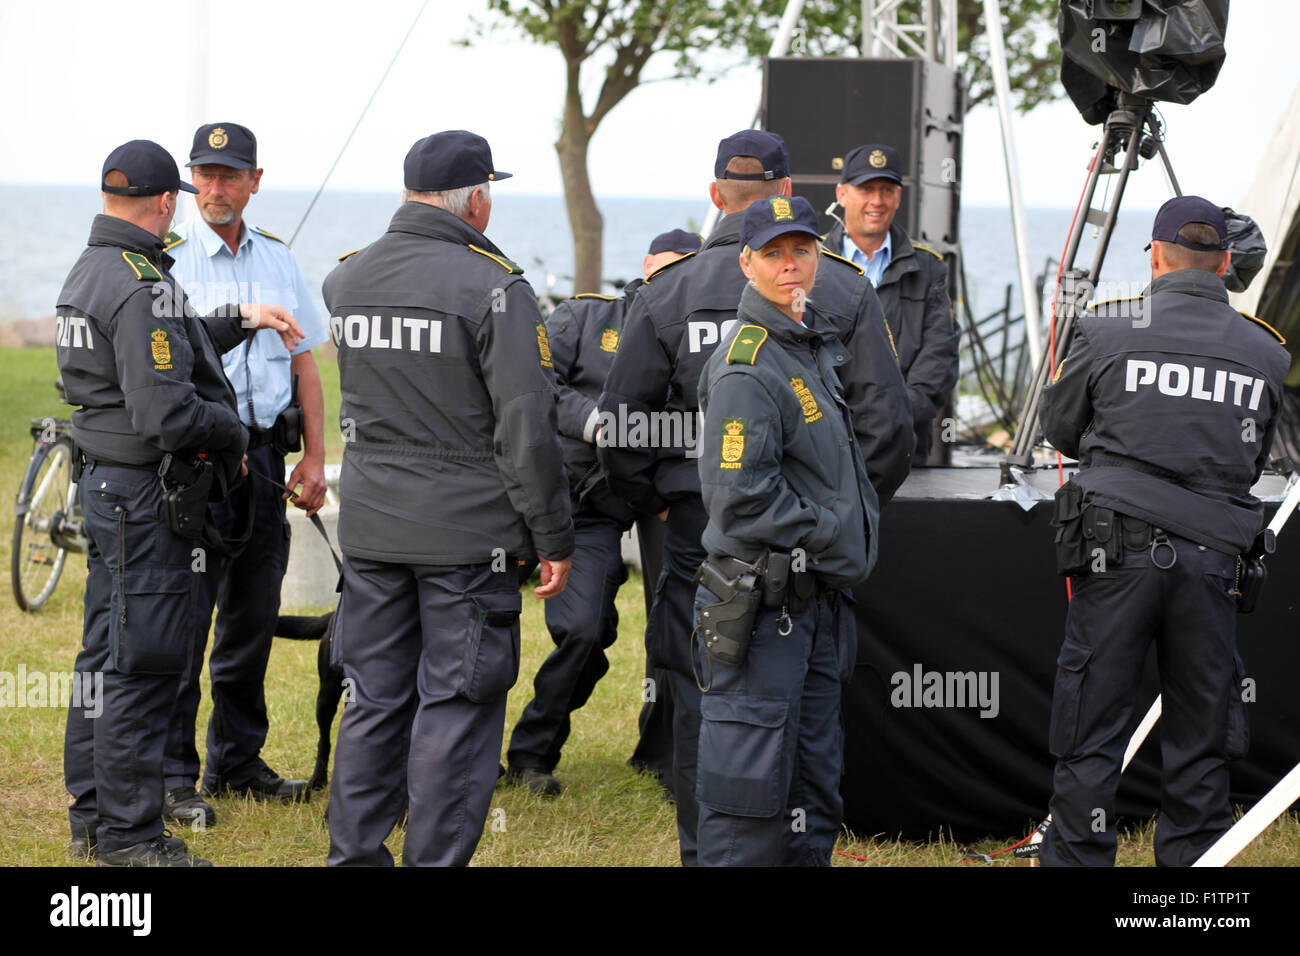 A female police officer standing out in group of several male police officers. Denmark. Stock Photo